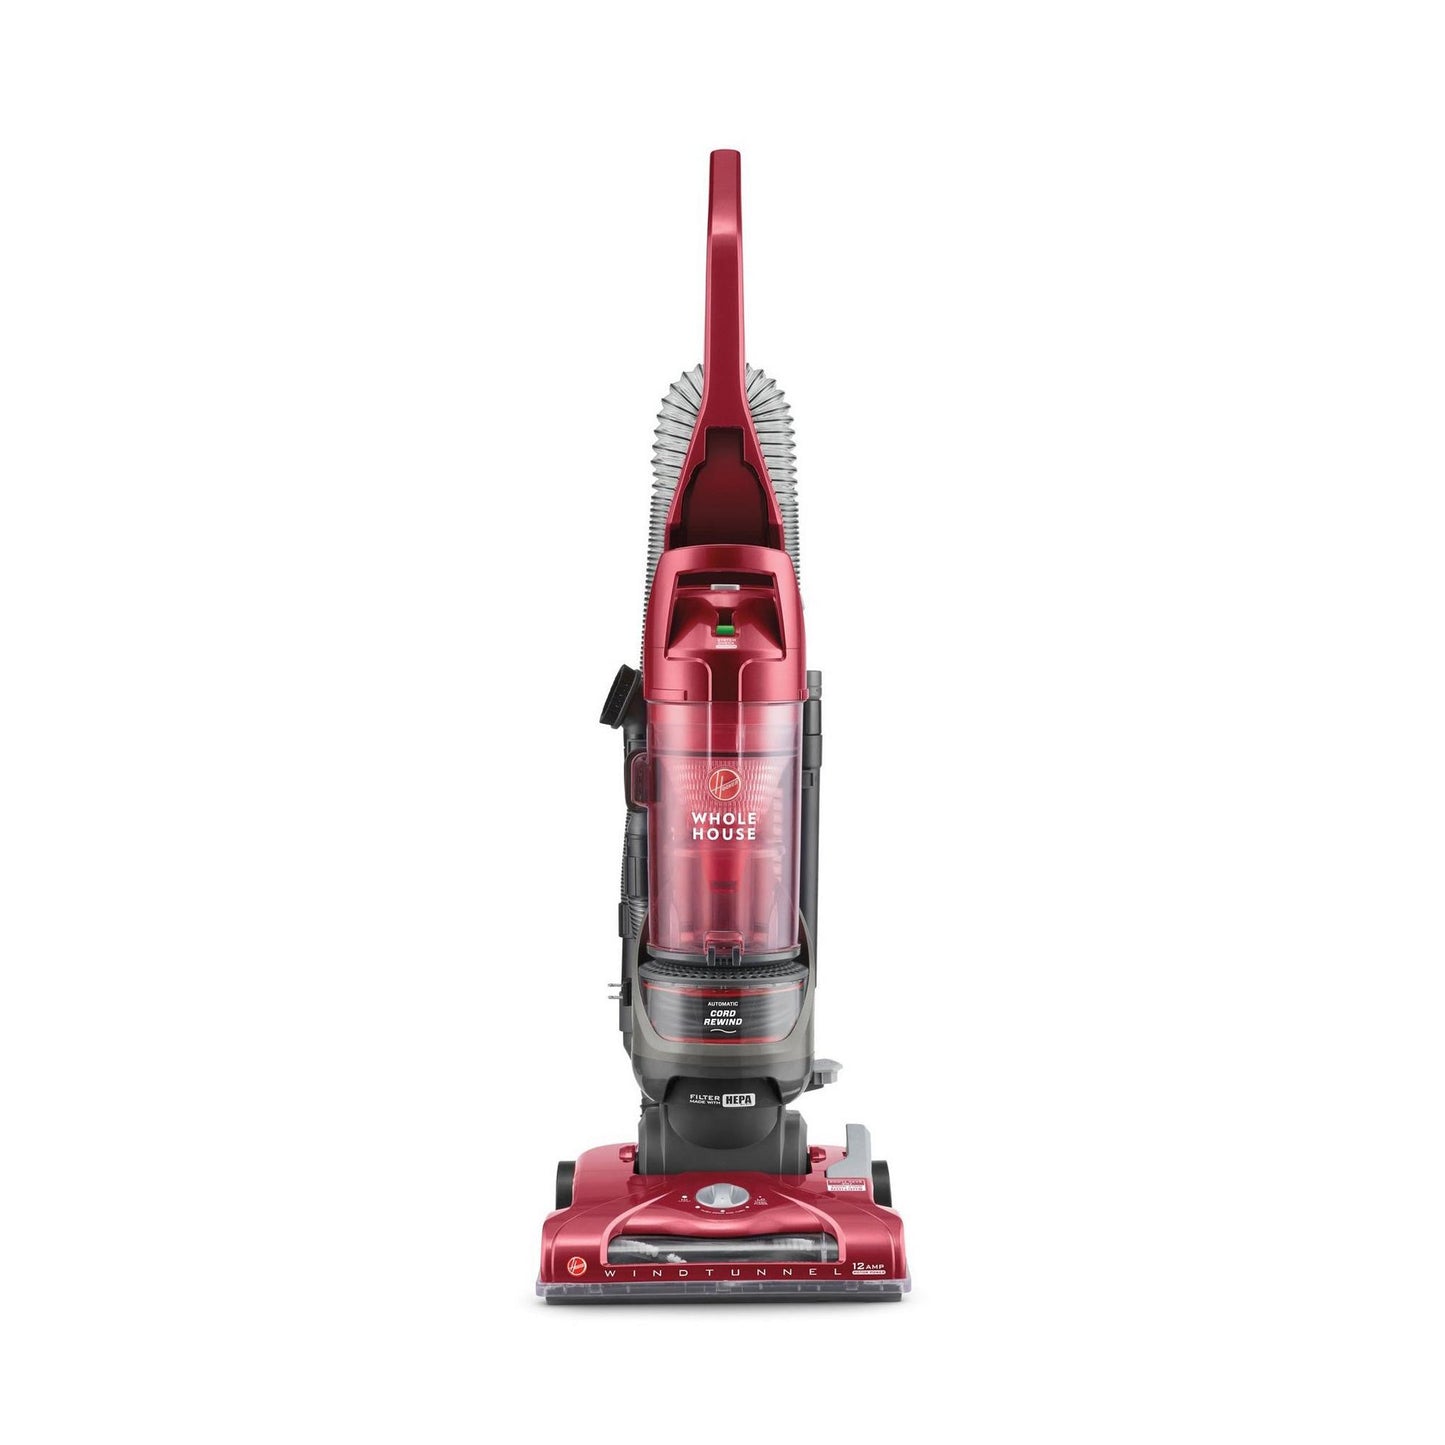 Reconditioned Whole House Upright Vacuum